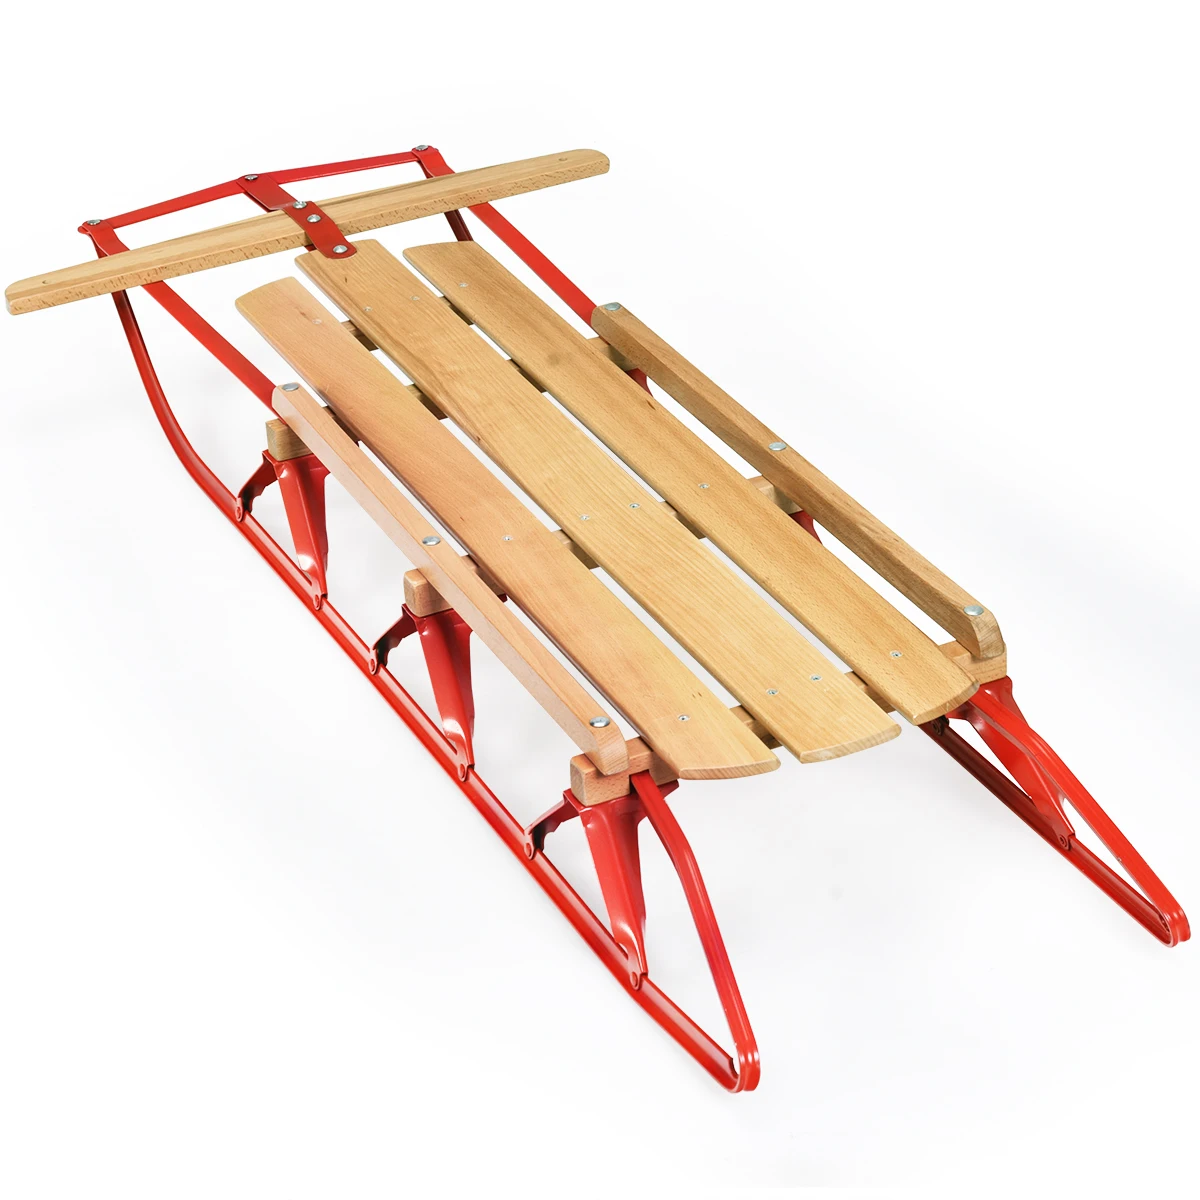 Details about   Kids Foldable Sled Snow Slider Wooden Seat Pull Steering Sleigh Toboggan w/ Rope 